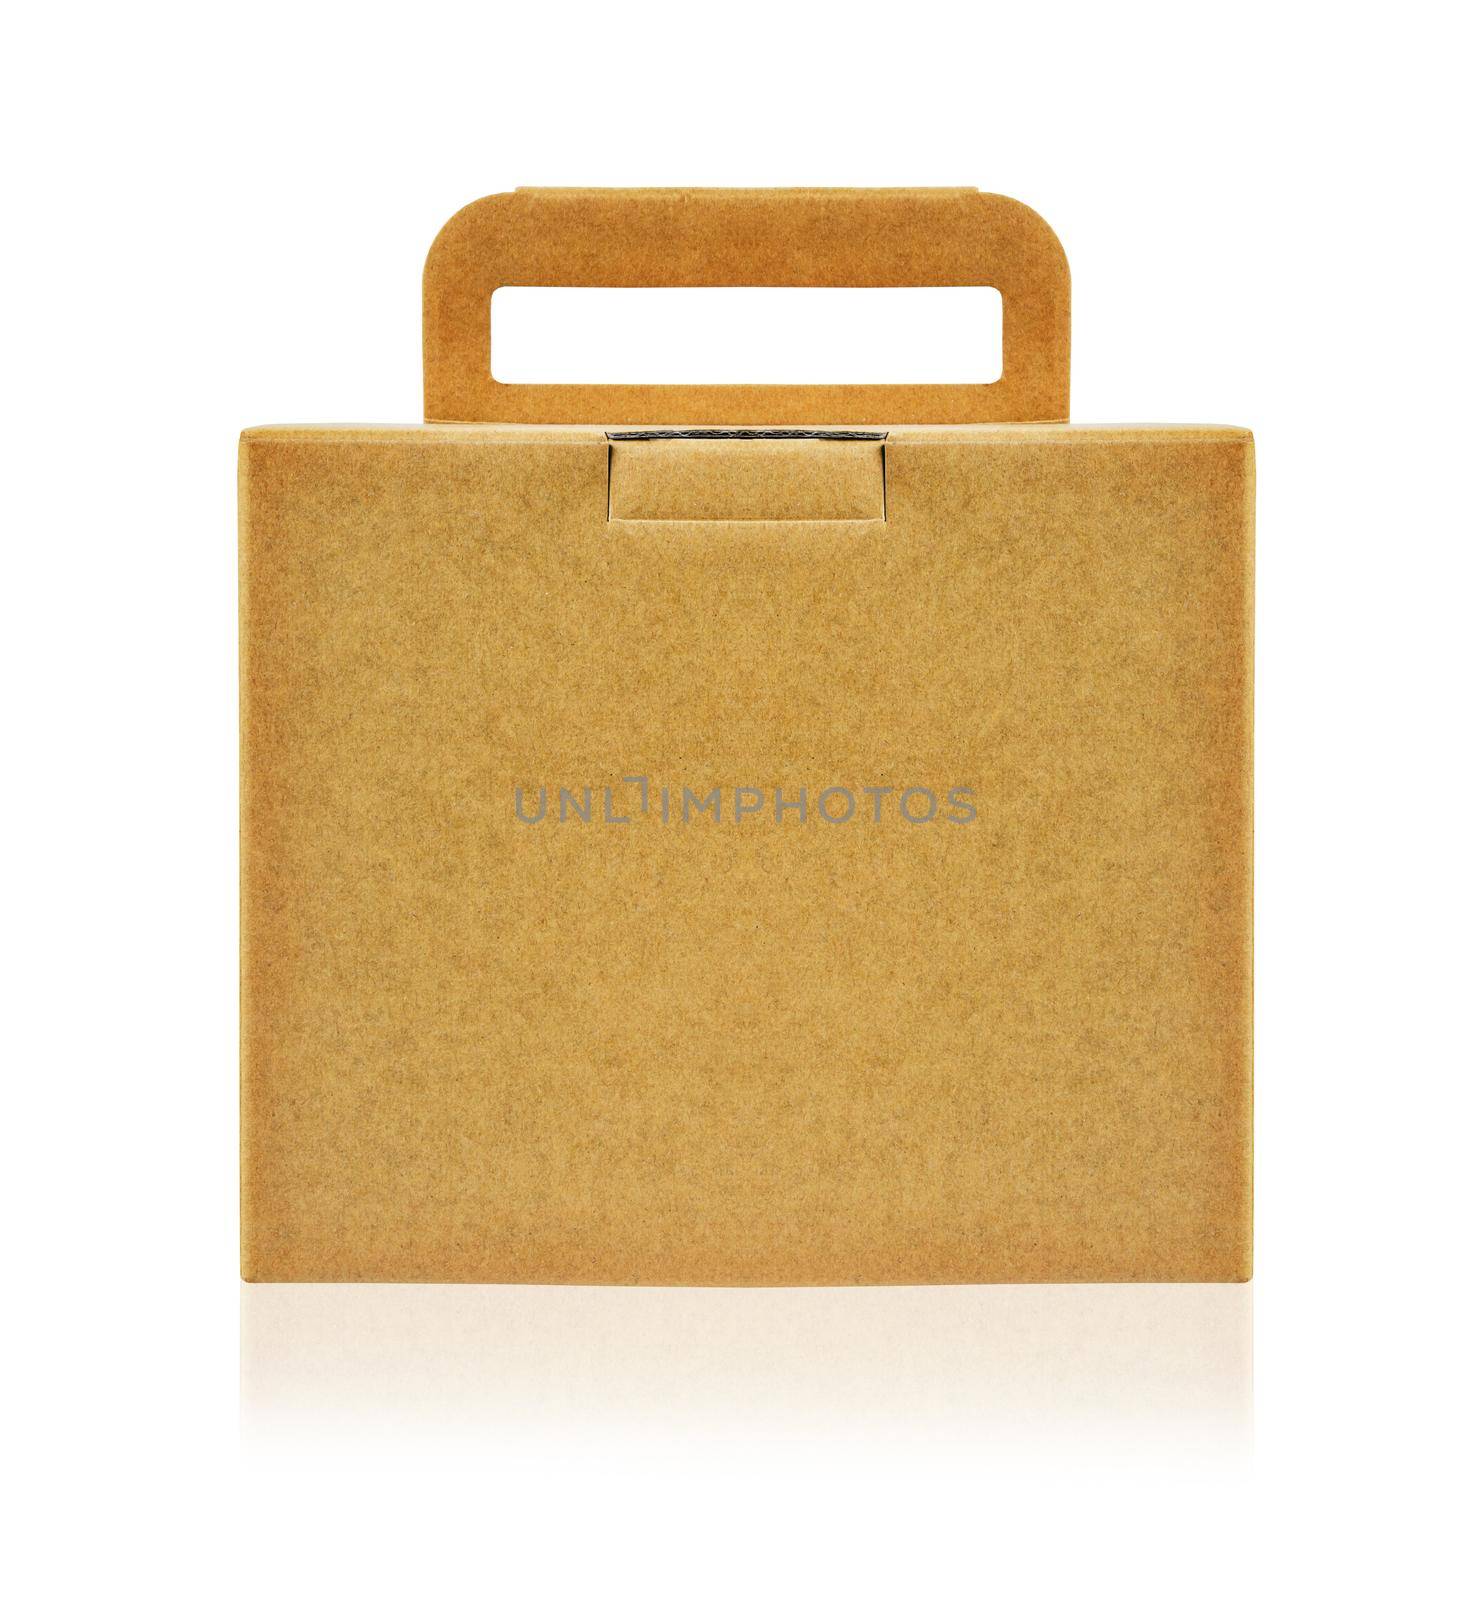 Ecology Box Bag for Take away isolated on a white background, Clipping path. Environment concepts.